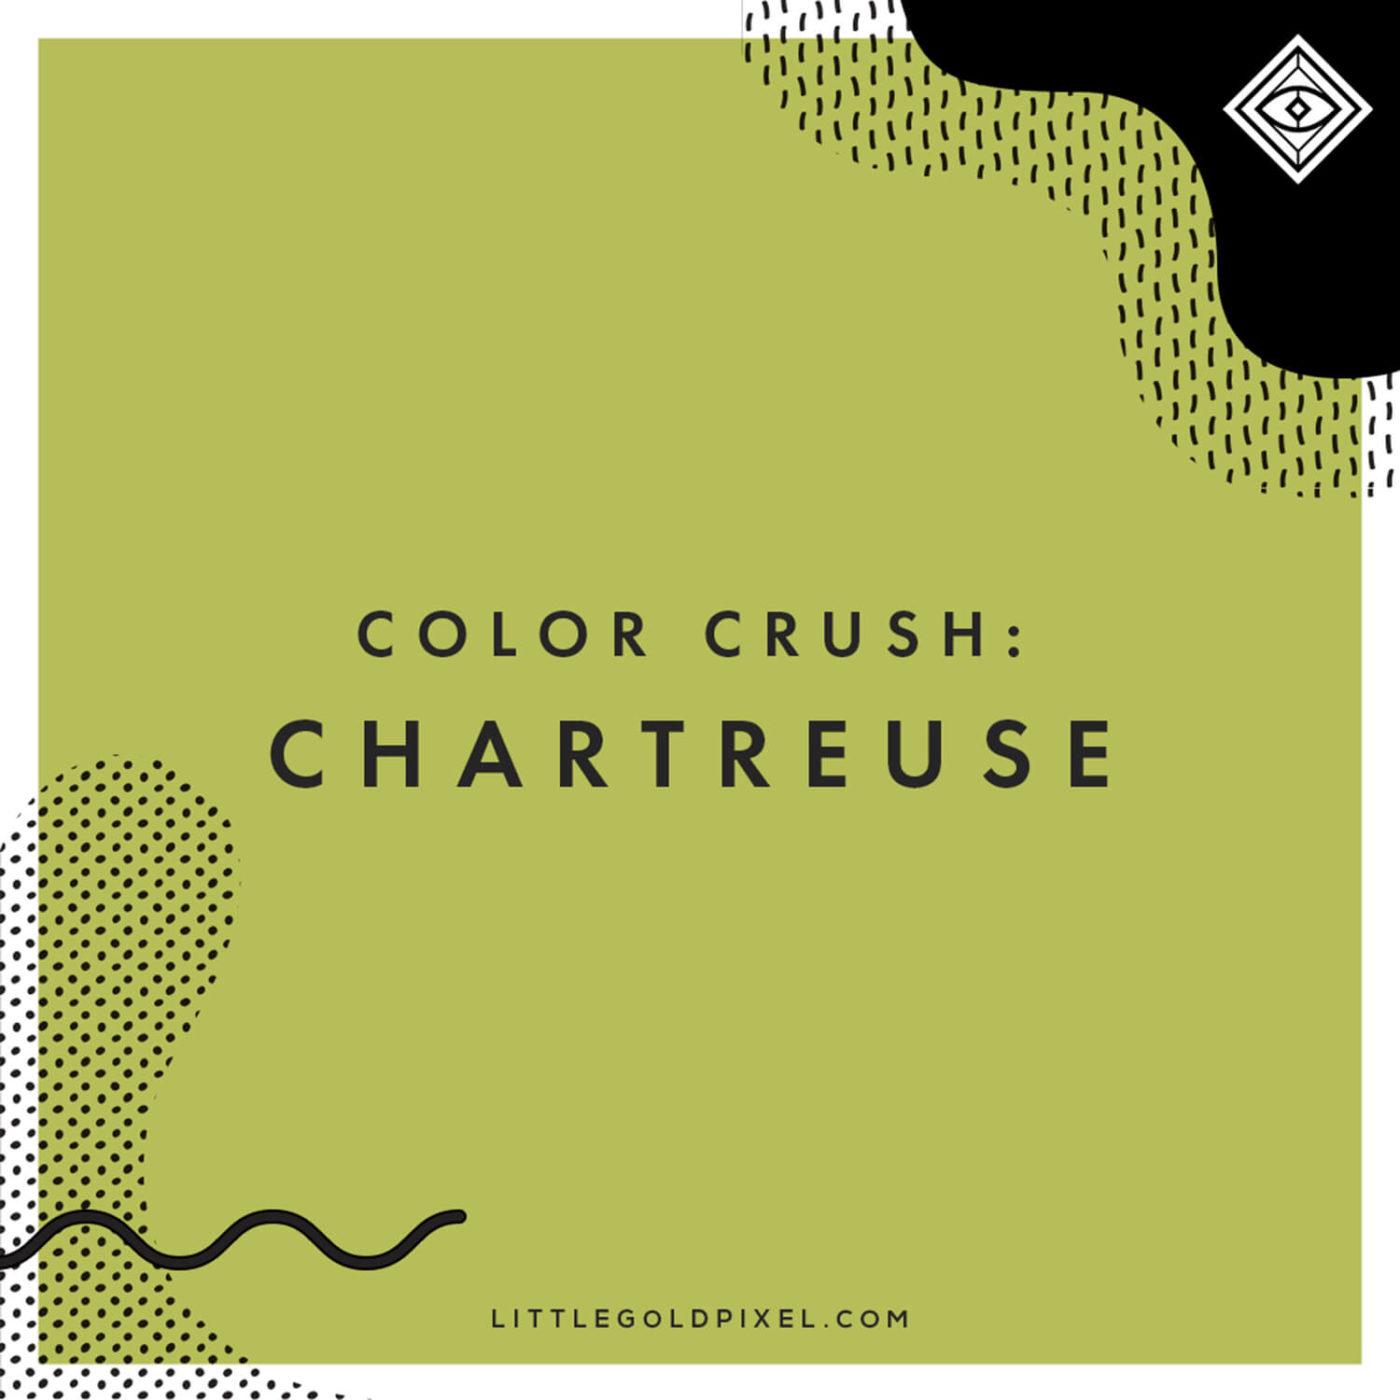 Color Crush: CHARTREUSE • Little Gold Pixel • What's the deal with chartreuse? I dissect the chartreuse color trend, give you 20 ways to rock the hue and a color palette to help you shop!
#chartreuse #homedecor #trends #colortrend #colors #colorpalette #coloroftheyear